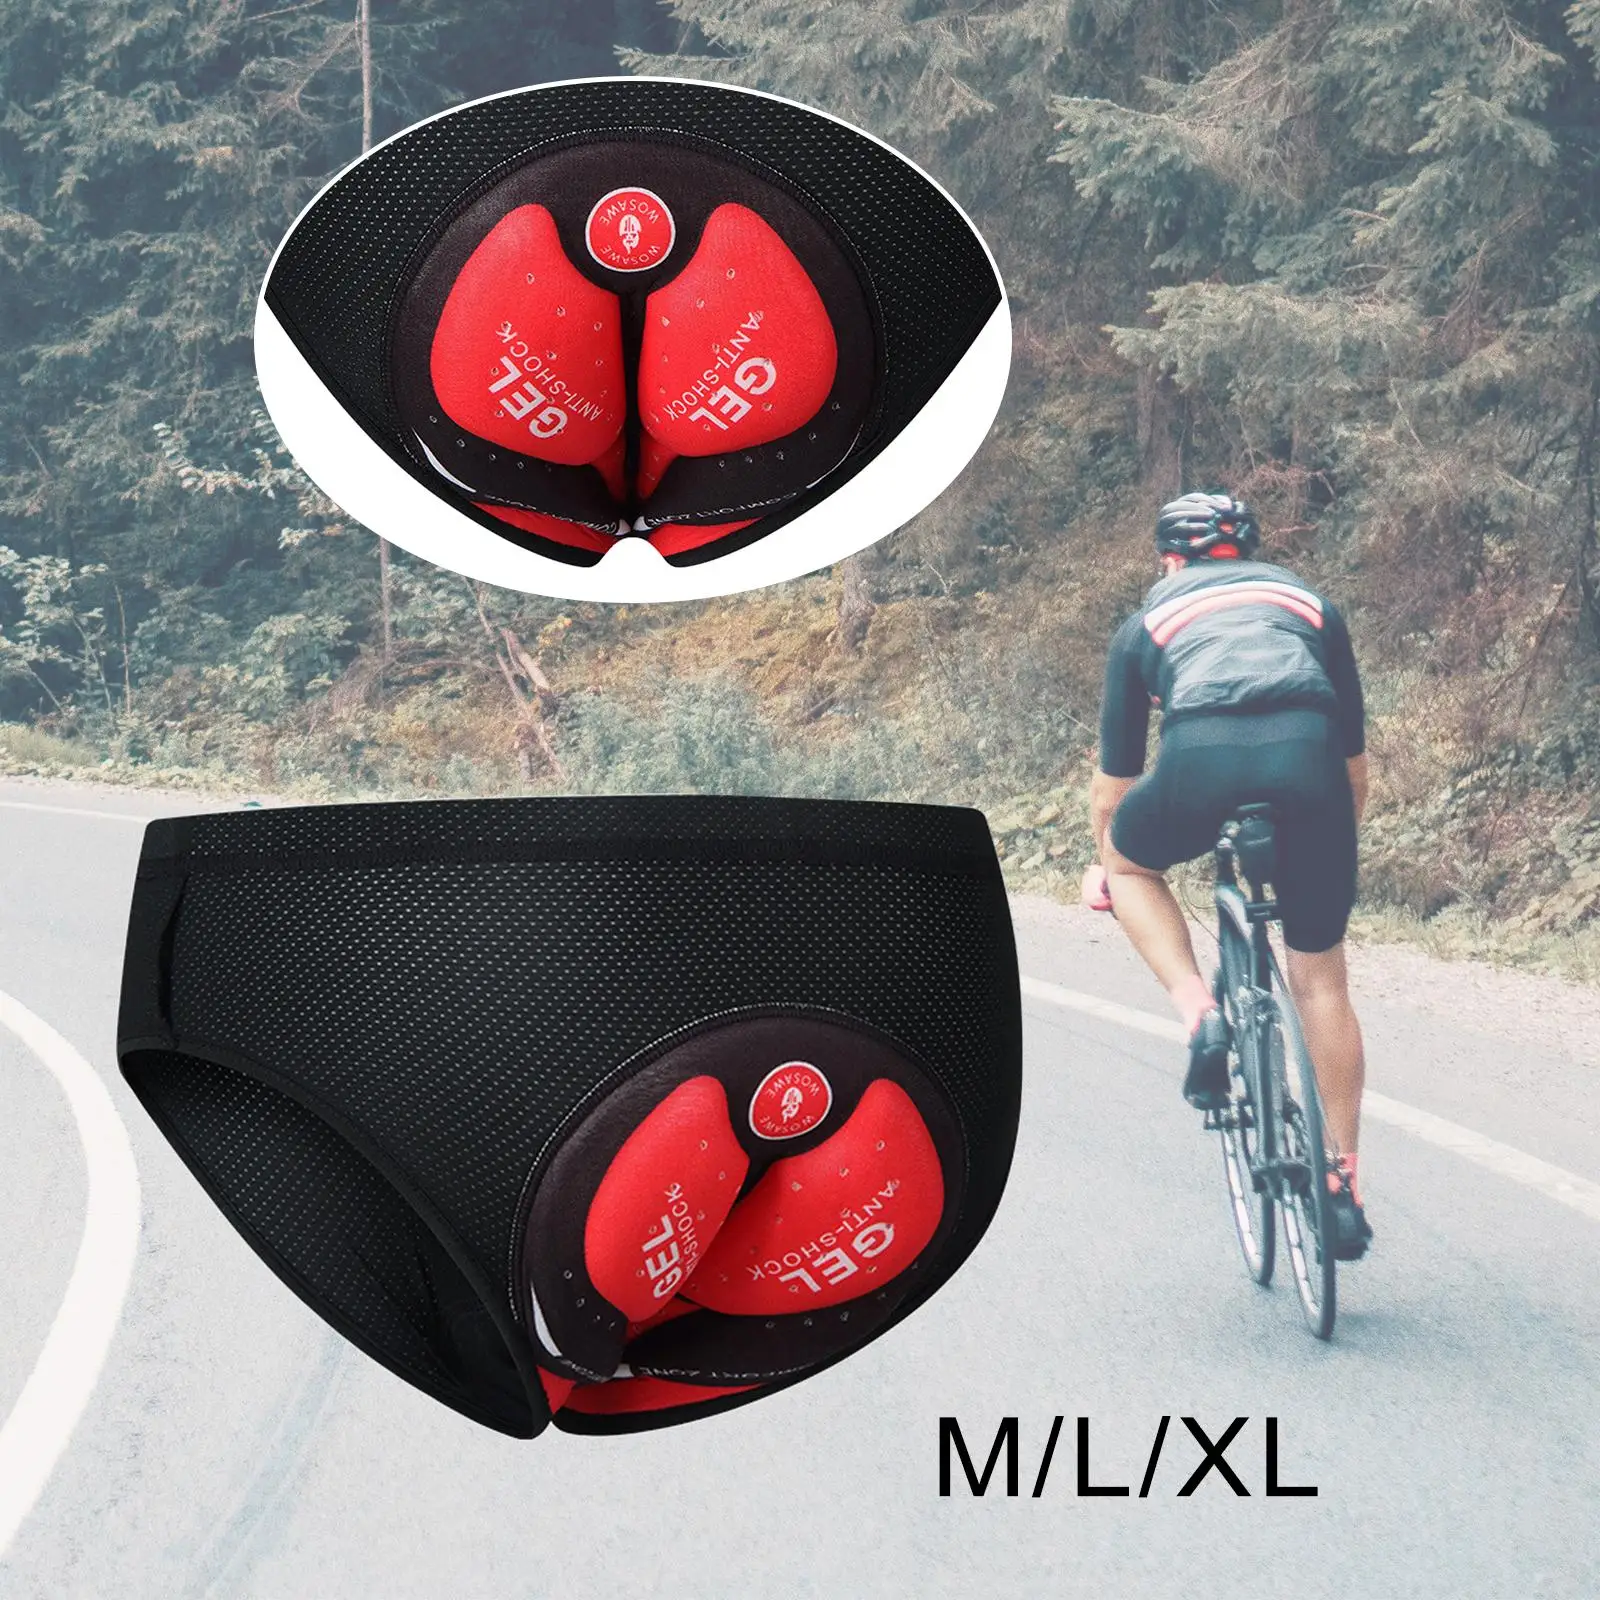 Men Cycling Shorts Briefs Undershorts 3D Padded Cycle Riding Bike Underwear